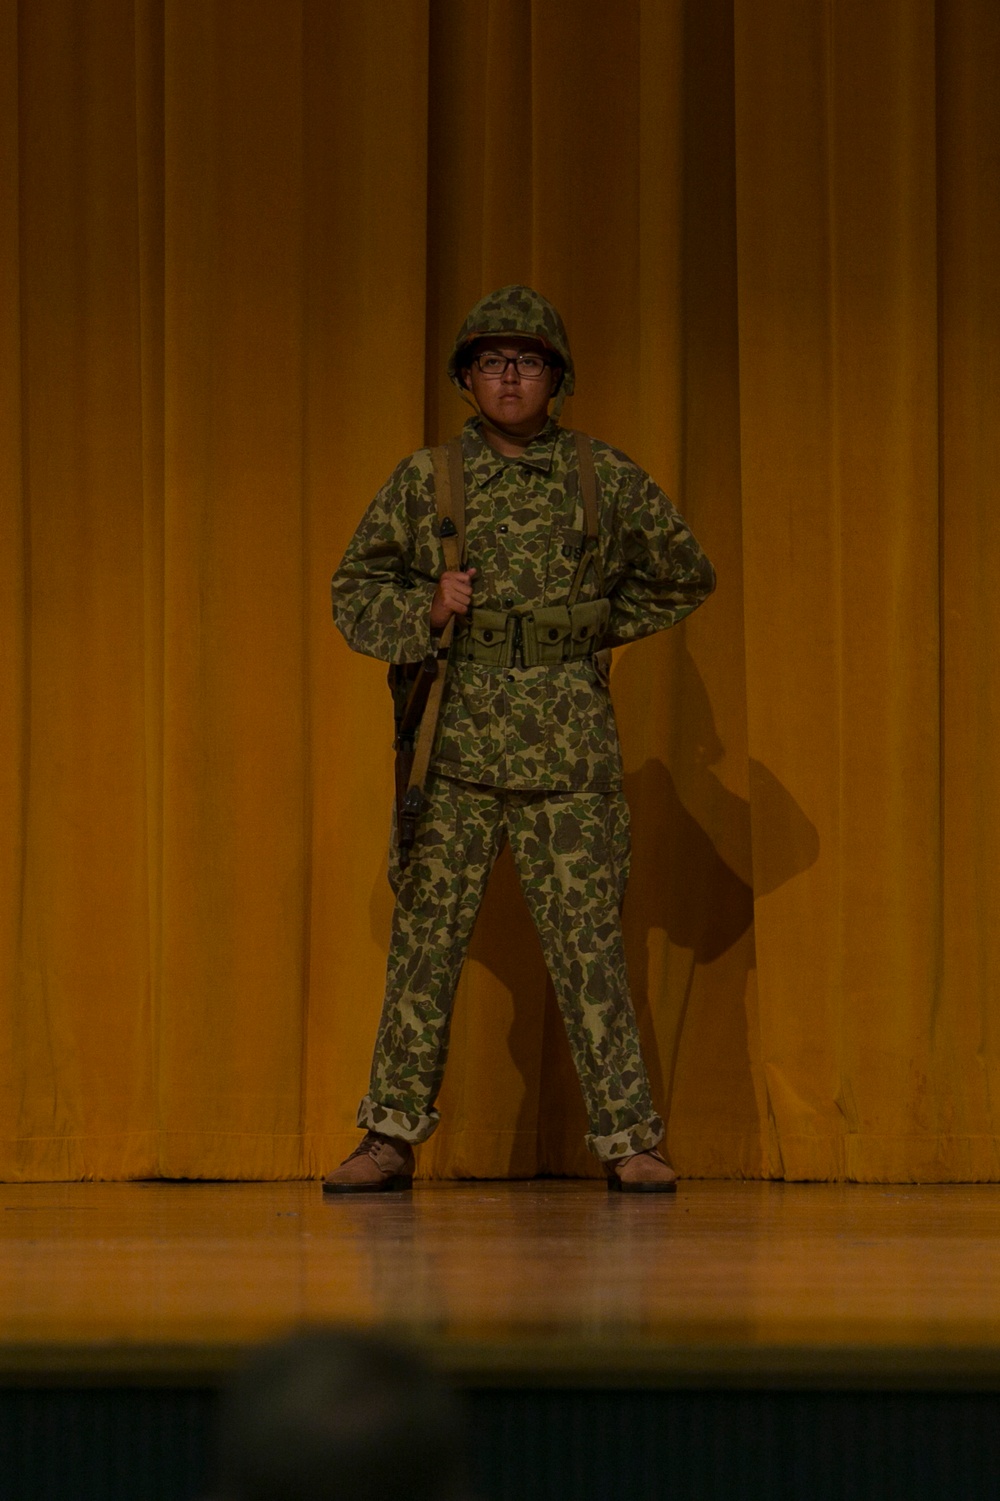 Kubasaki High School Junior Reserve Officer Training Corps cadets participate in Marine Corps uniform pageant